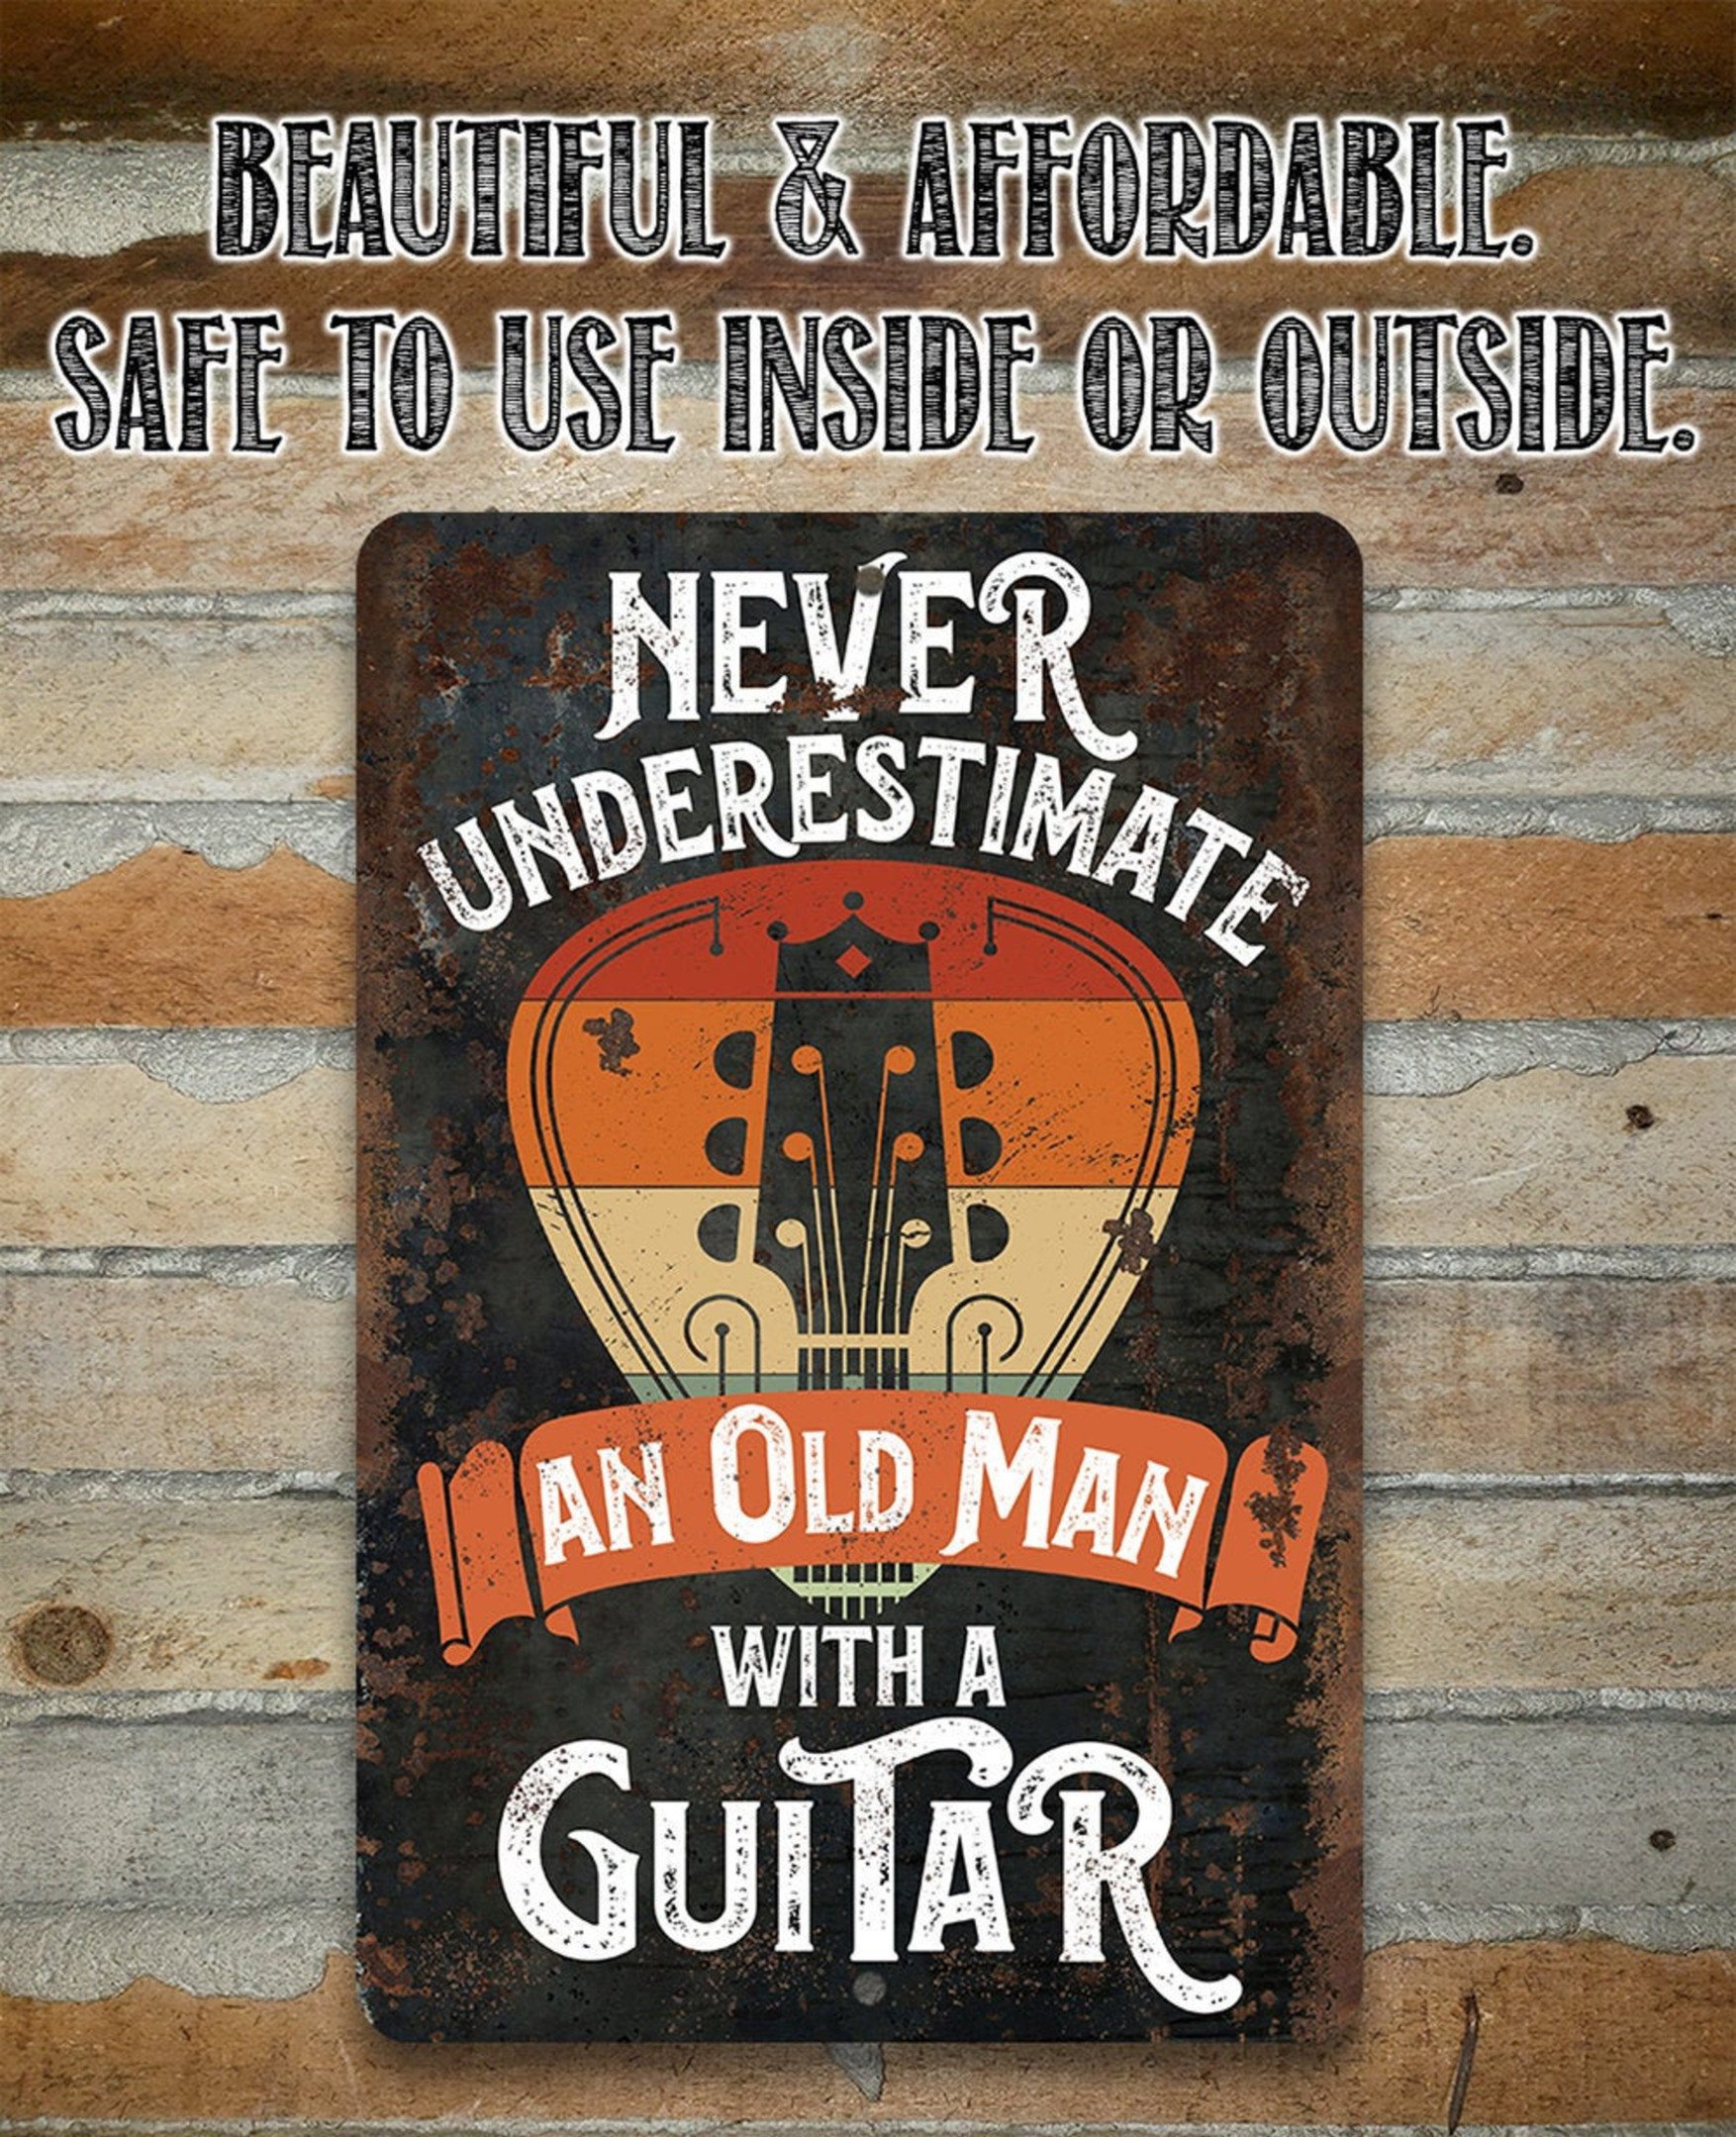 Never Underestimate An Old Man With a Guitar Aluminum Tin Awesome Metal Poster